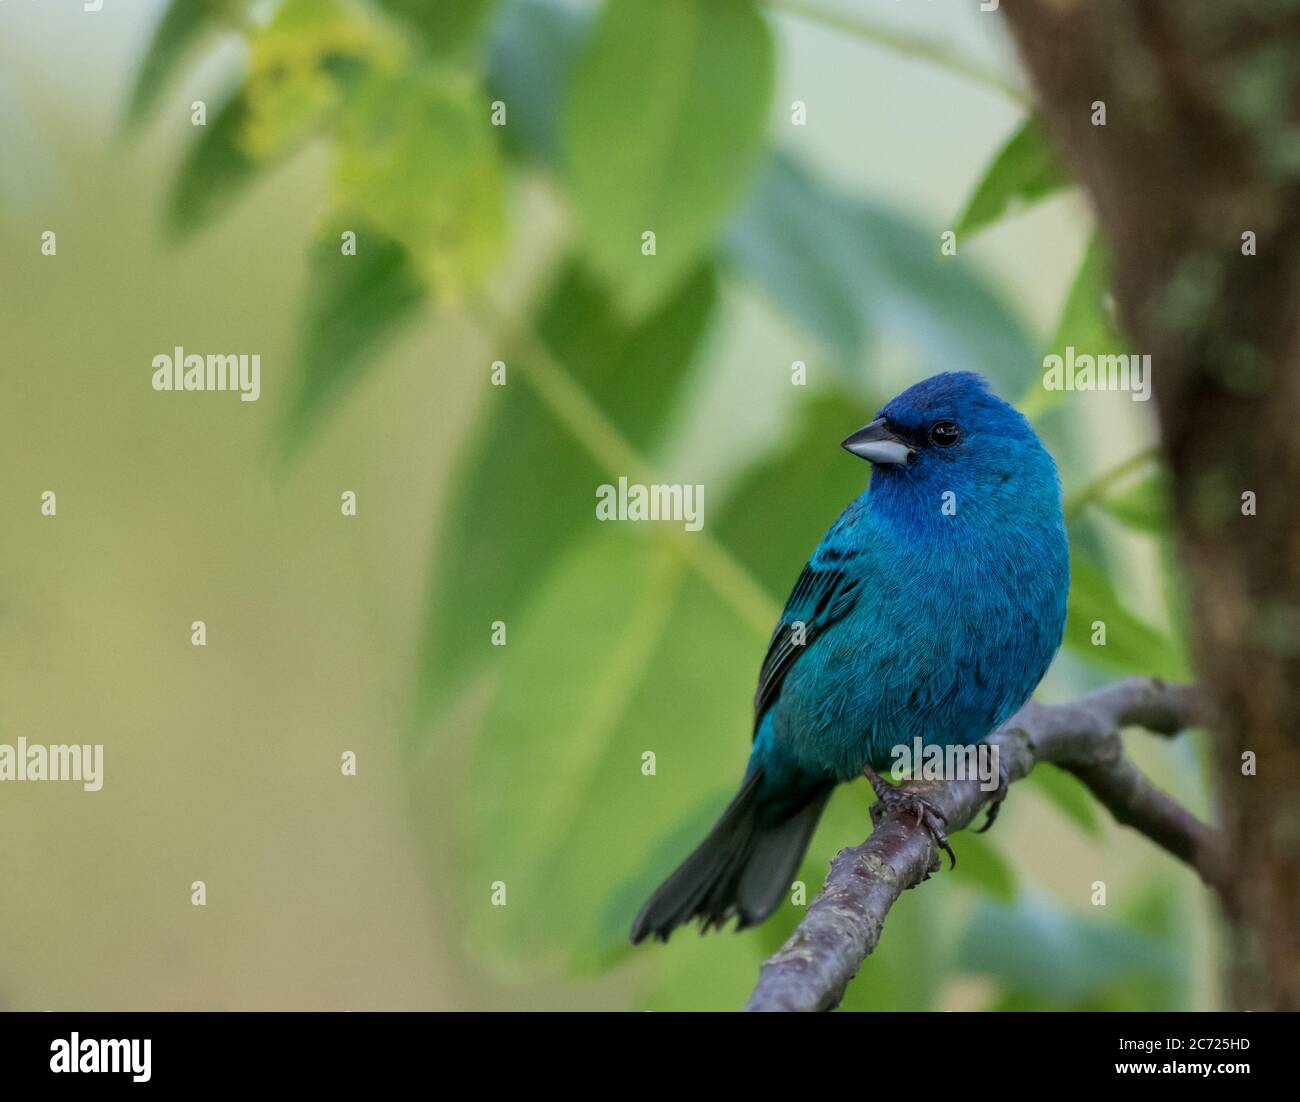 Indigo Bunting (Passerina cyanea) perched on branch soft green leaves background Stock Photo